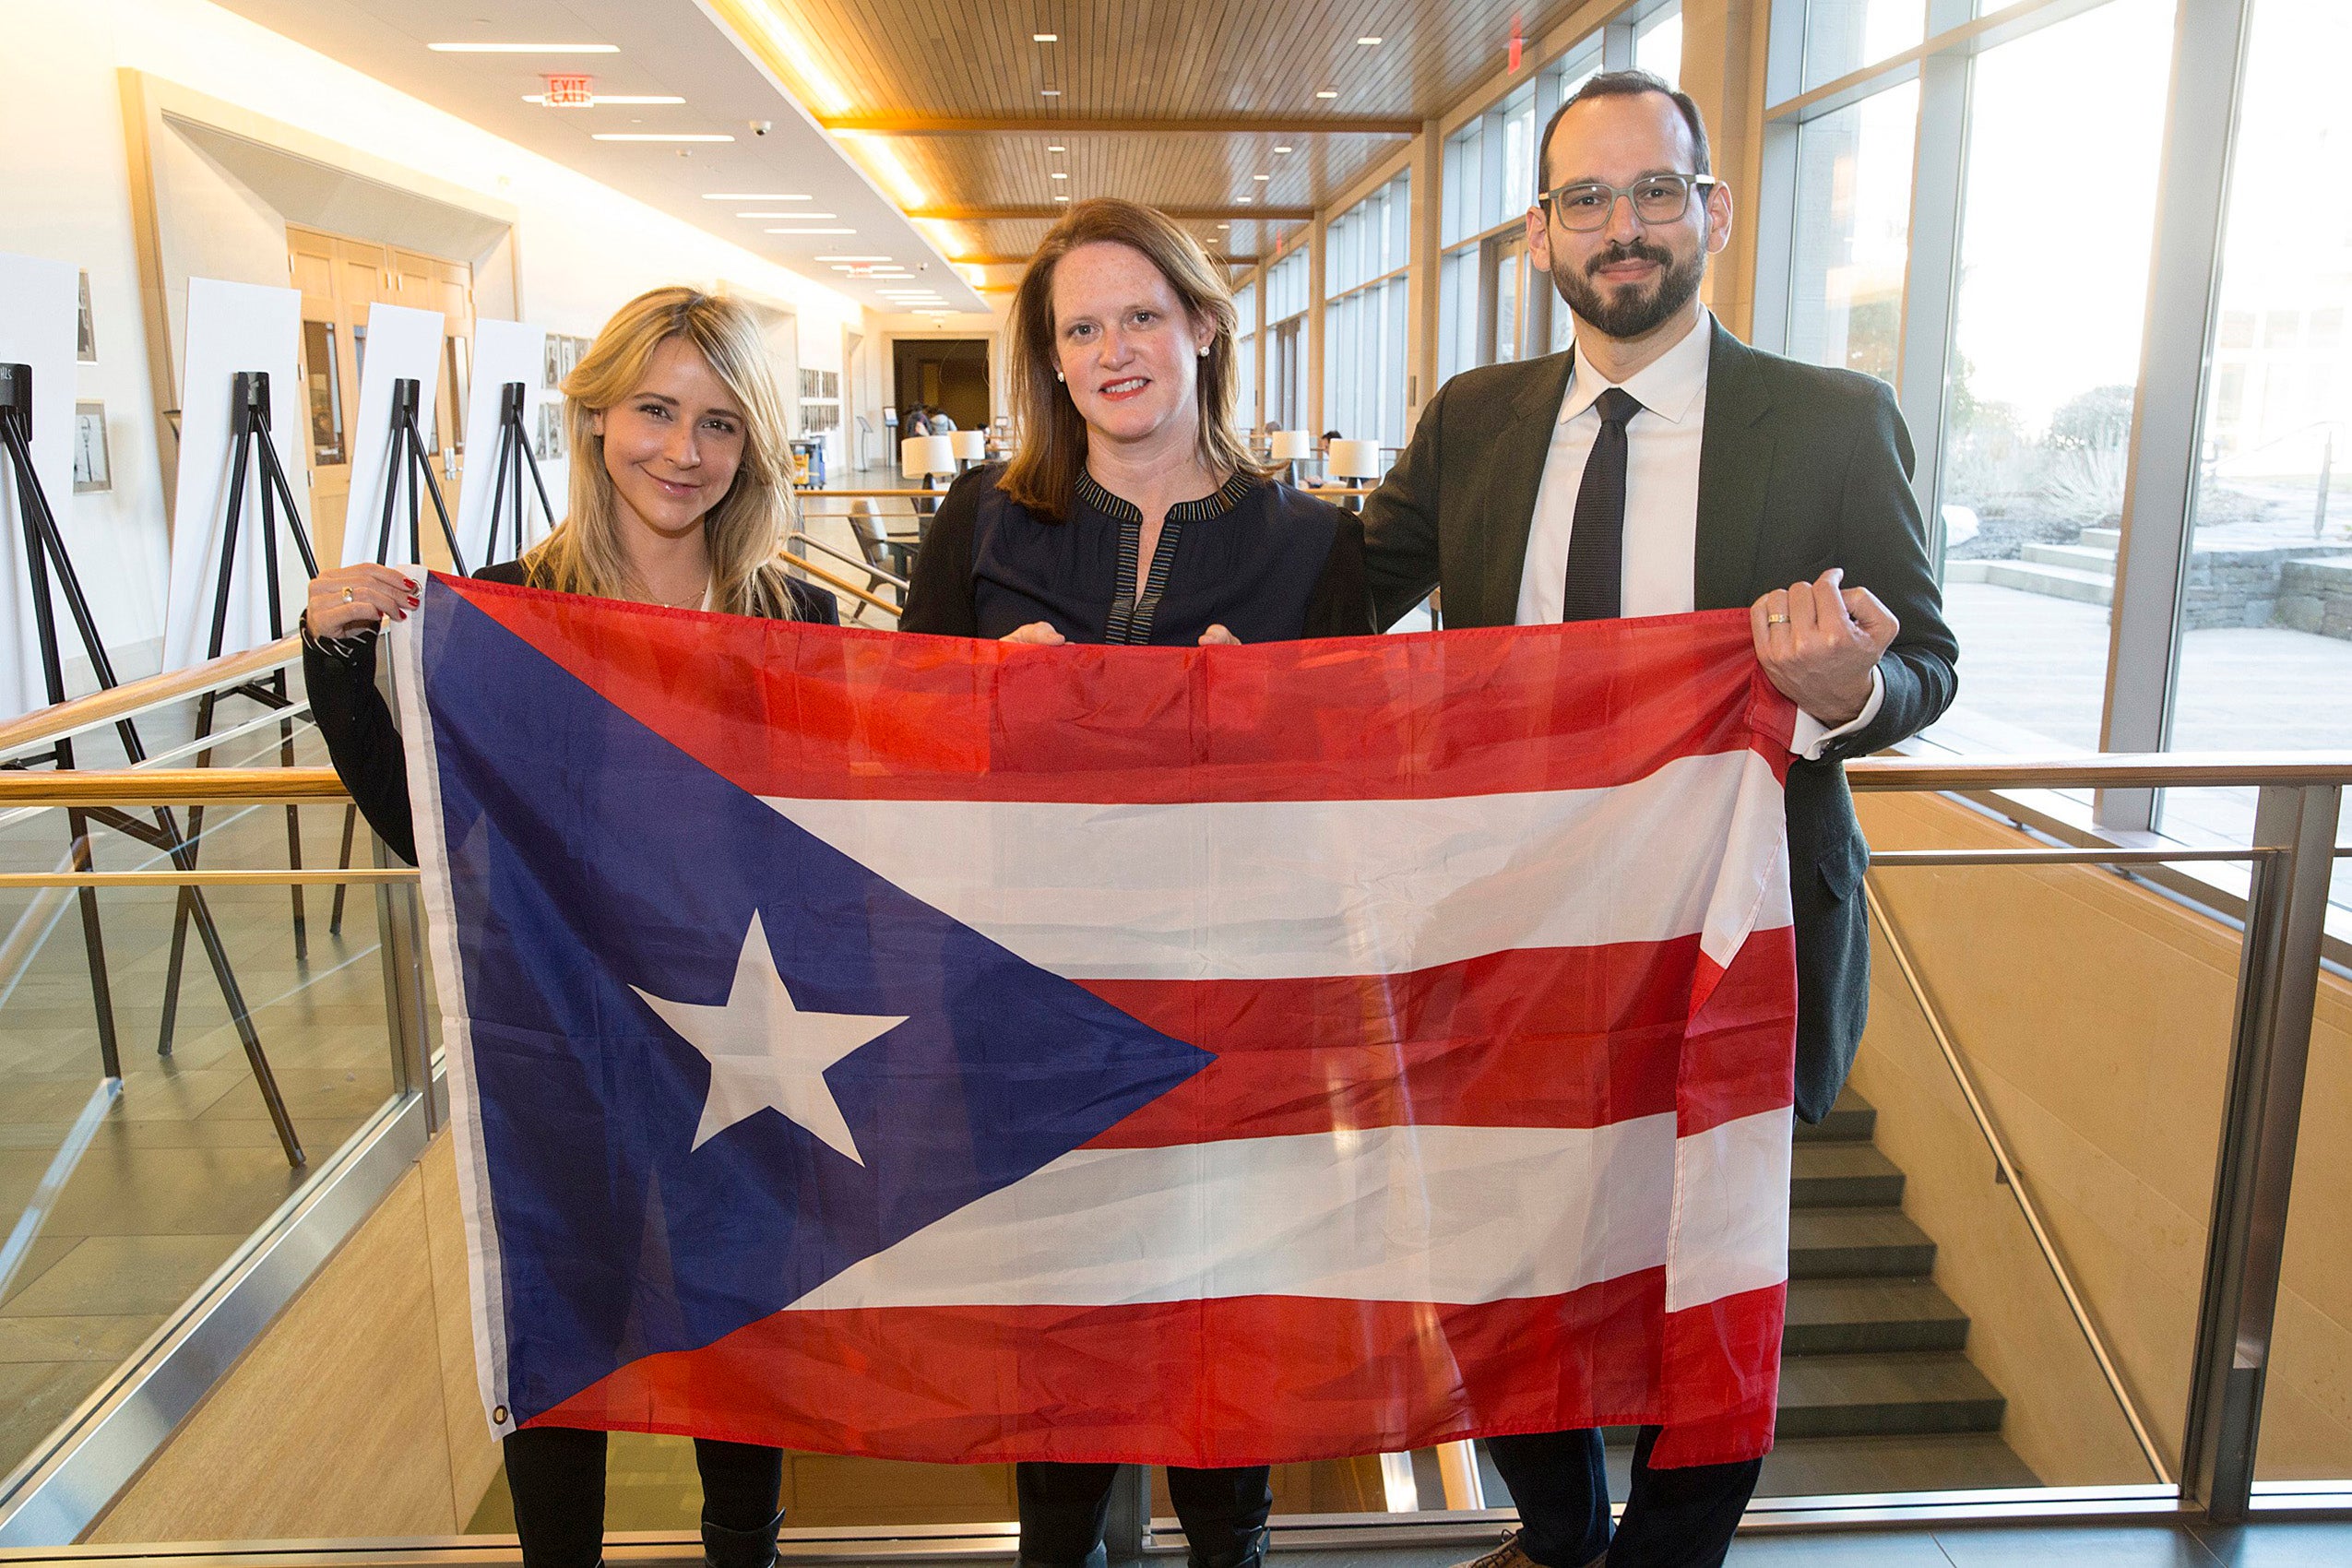 Law students help to mend Puerto Rico